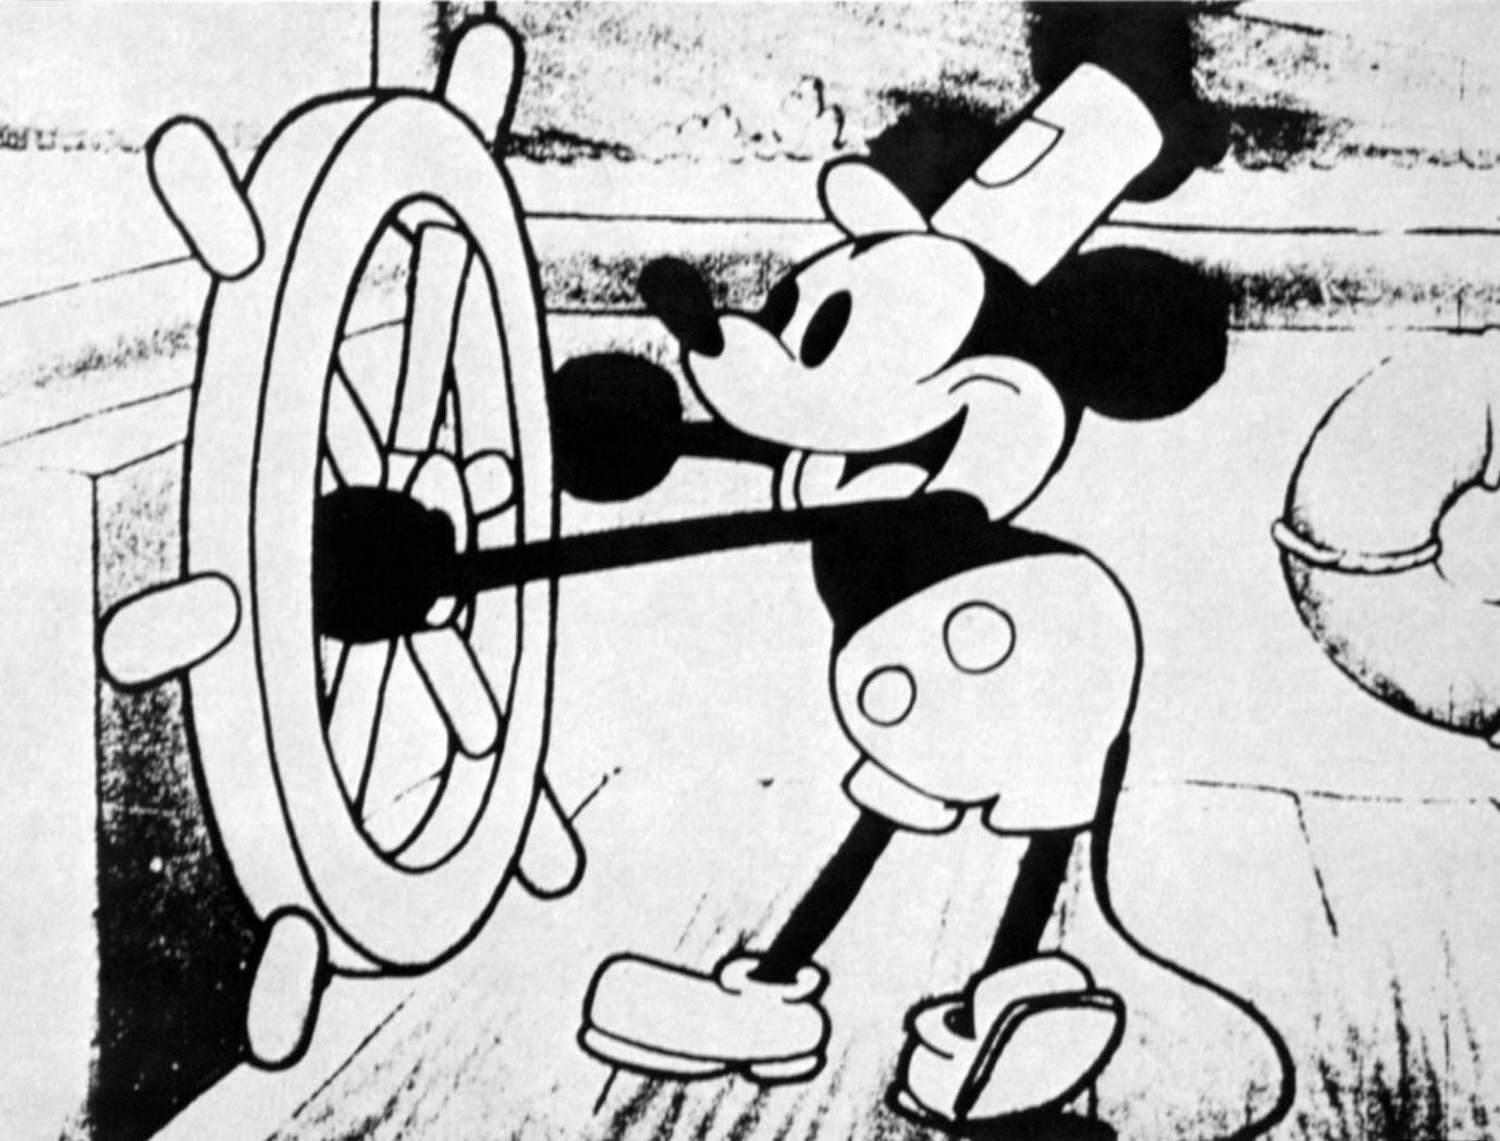 mickey mouse copyright expiration inspires horror movies, video games and memes